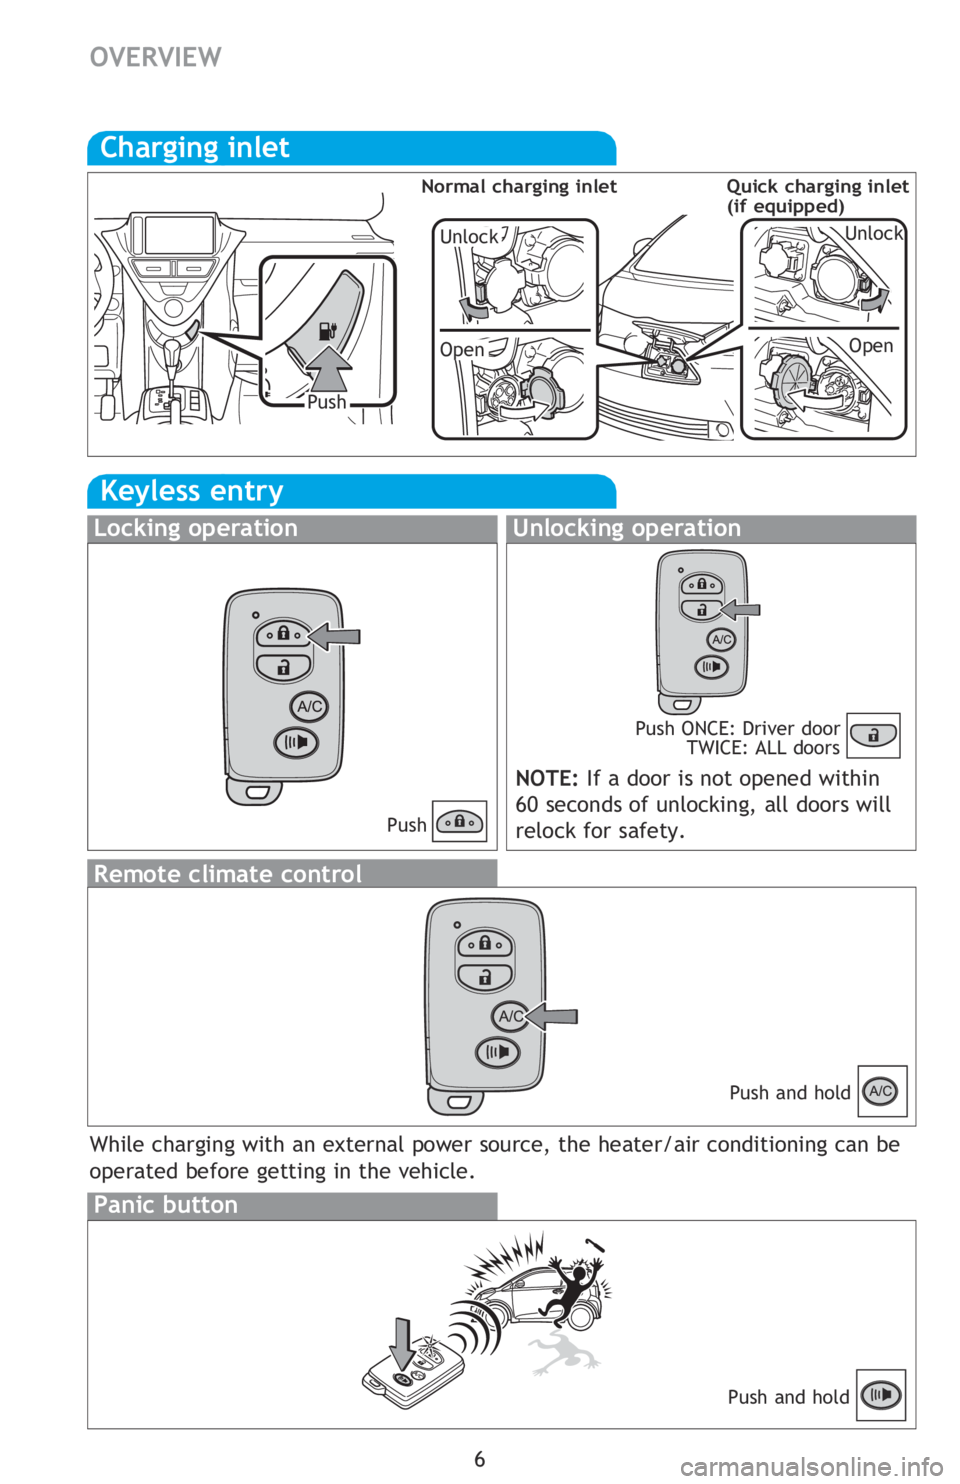 TOYOTA iQ EV 2013  Owners Manual (in English) 6
OVERVIEW
Keyless entry
Locking operationUnlocking operation
NOTE: If a door is not opened within 
60 seconds of unlocking, all doors will 
relock for safety.
PushPush ONCE: Driver door
 
TWICE: ALL 